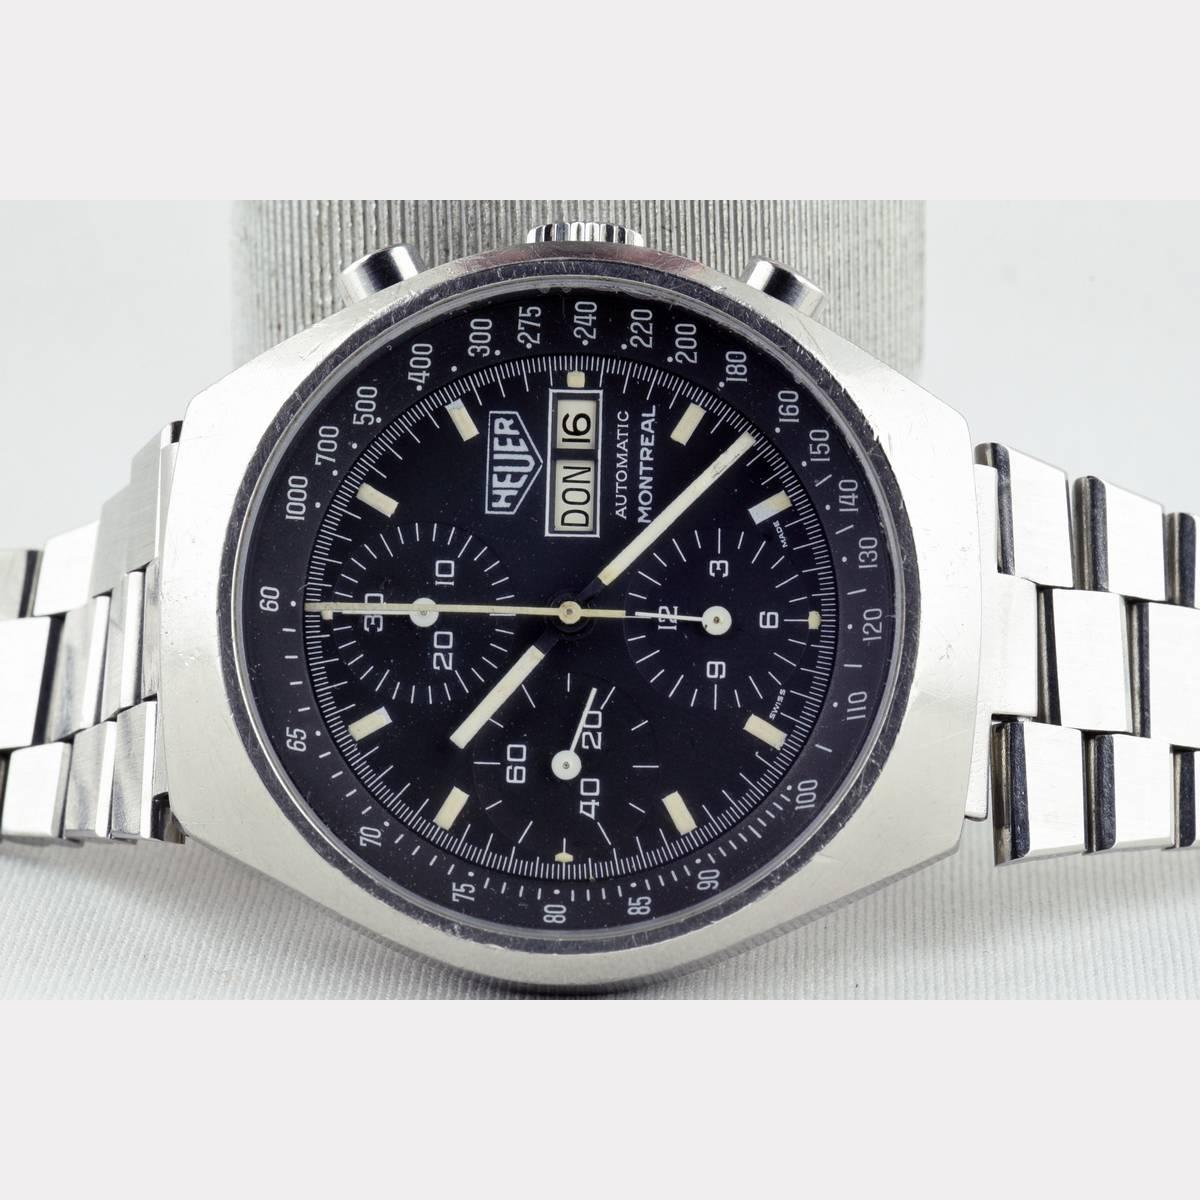 Classical Vintage Heuer Montreal Automatic Chronograph, 1980 In Good Condition For Sale In Berlin, DE